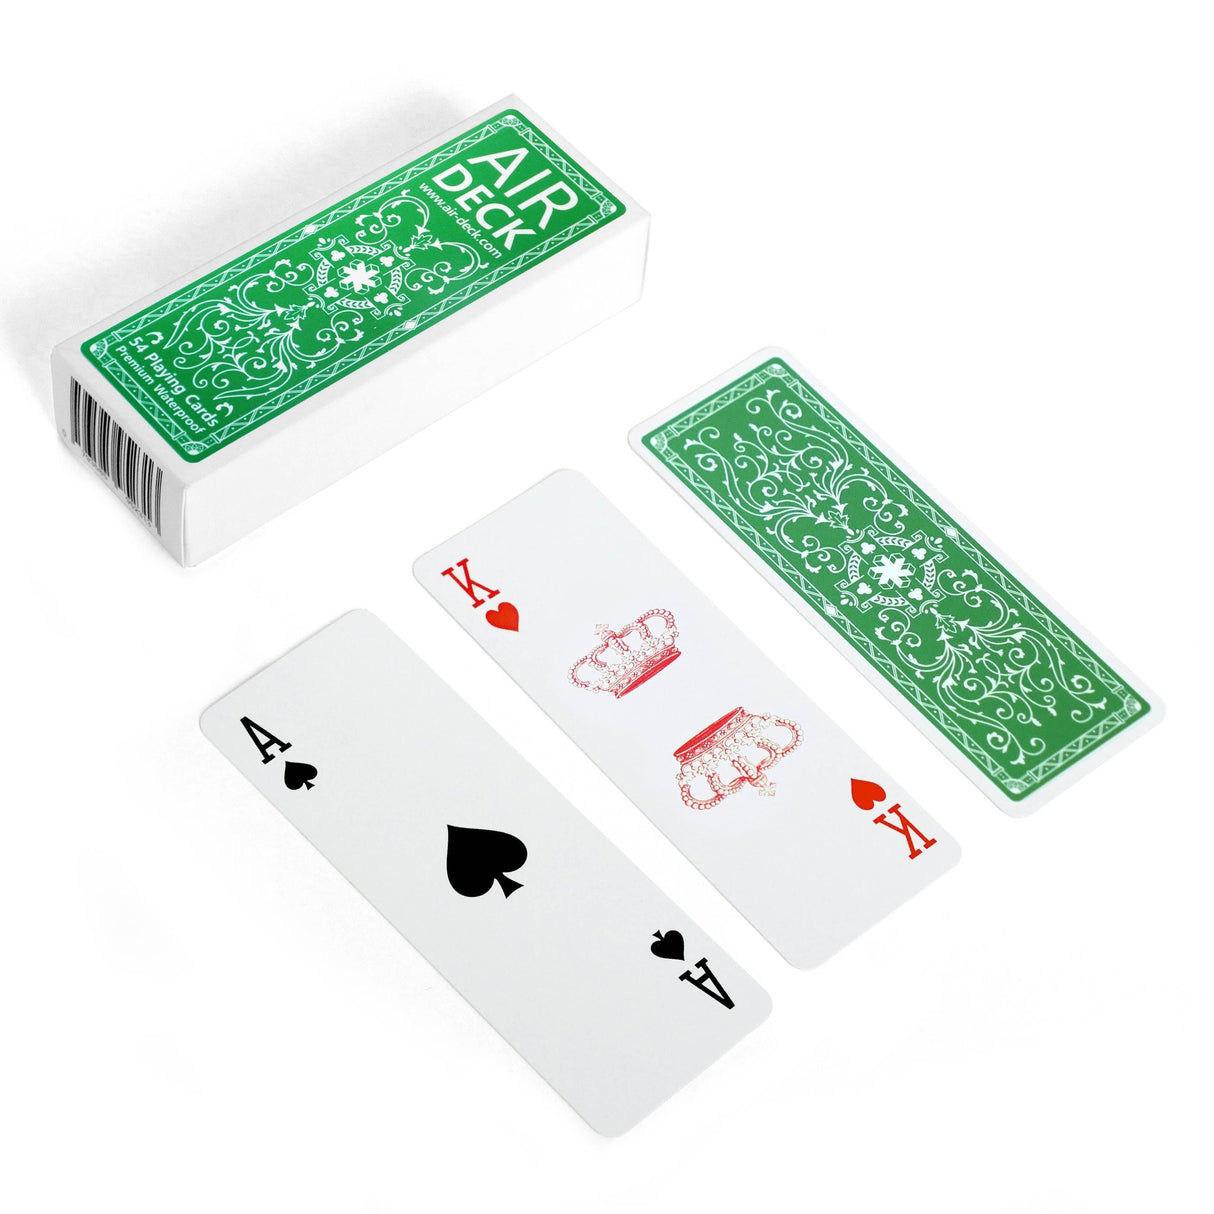 Air Deck 2.0 Playing Cards